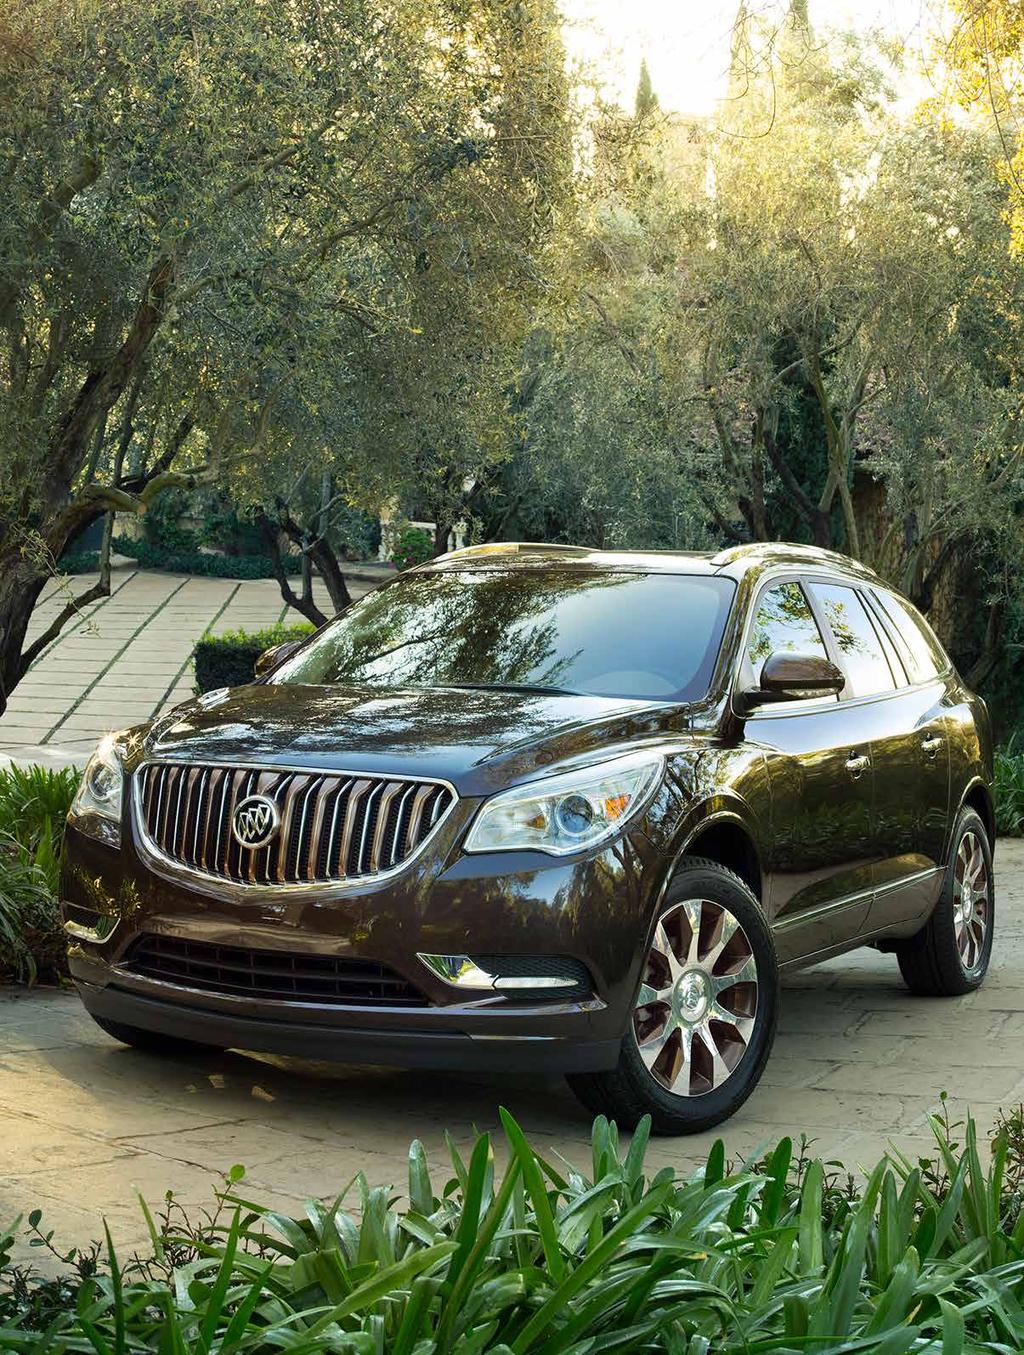 While every Enclave is designed to make you feel special, the Enclave Tuscan